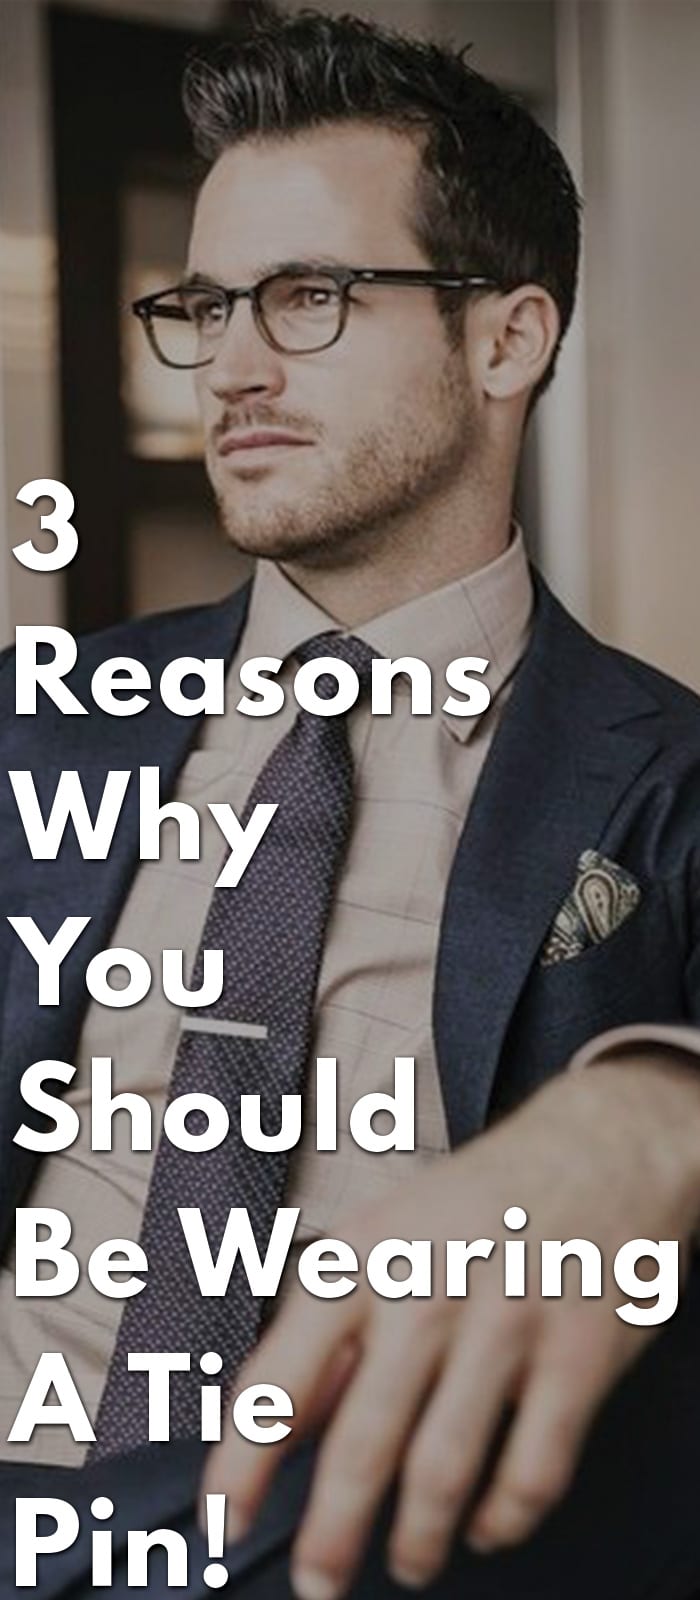 3-Reasons-Why-You-Should-Be-Wearing-A-Tie-Pin!